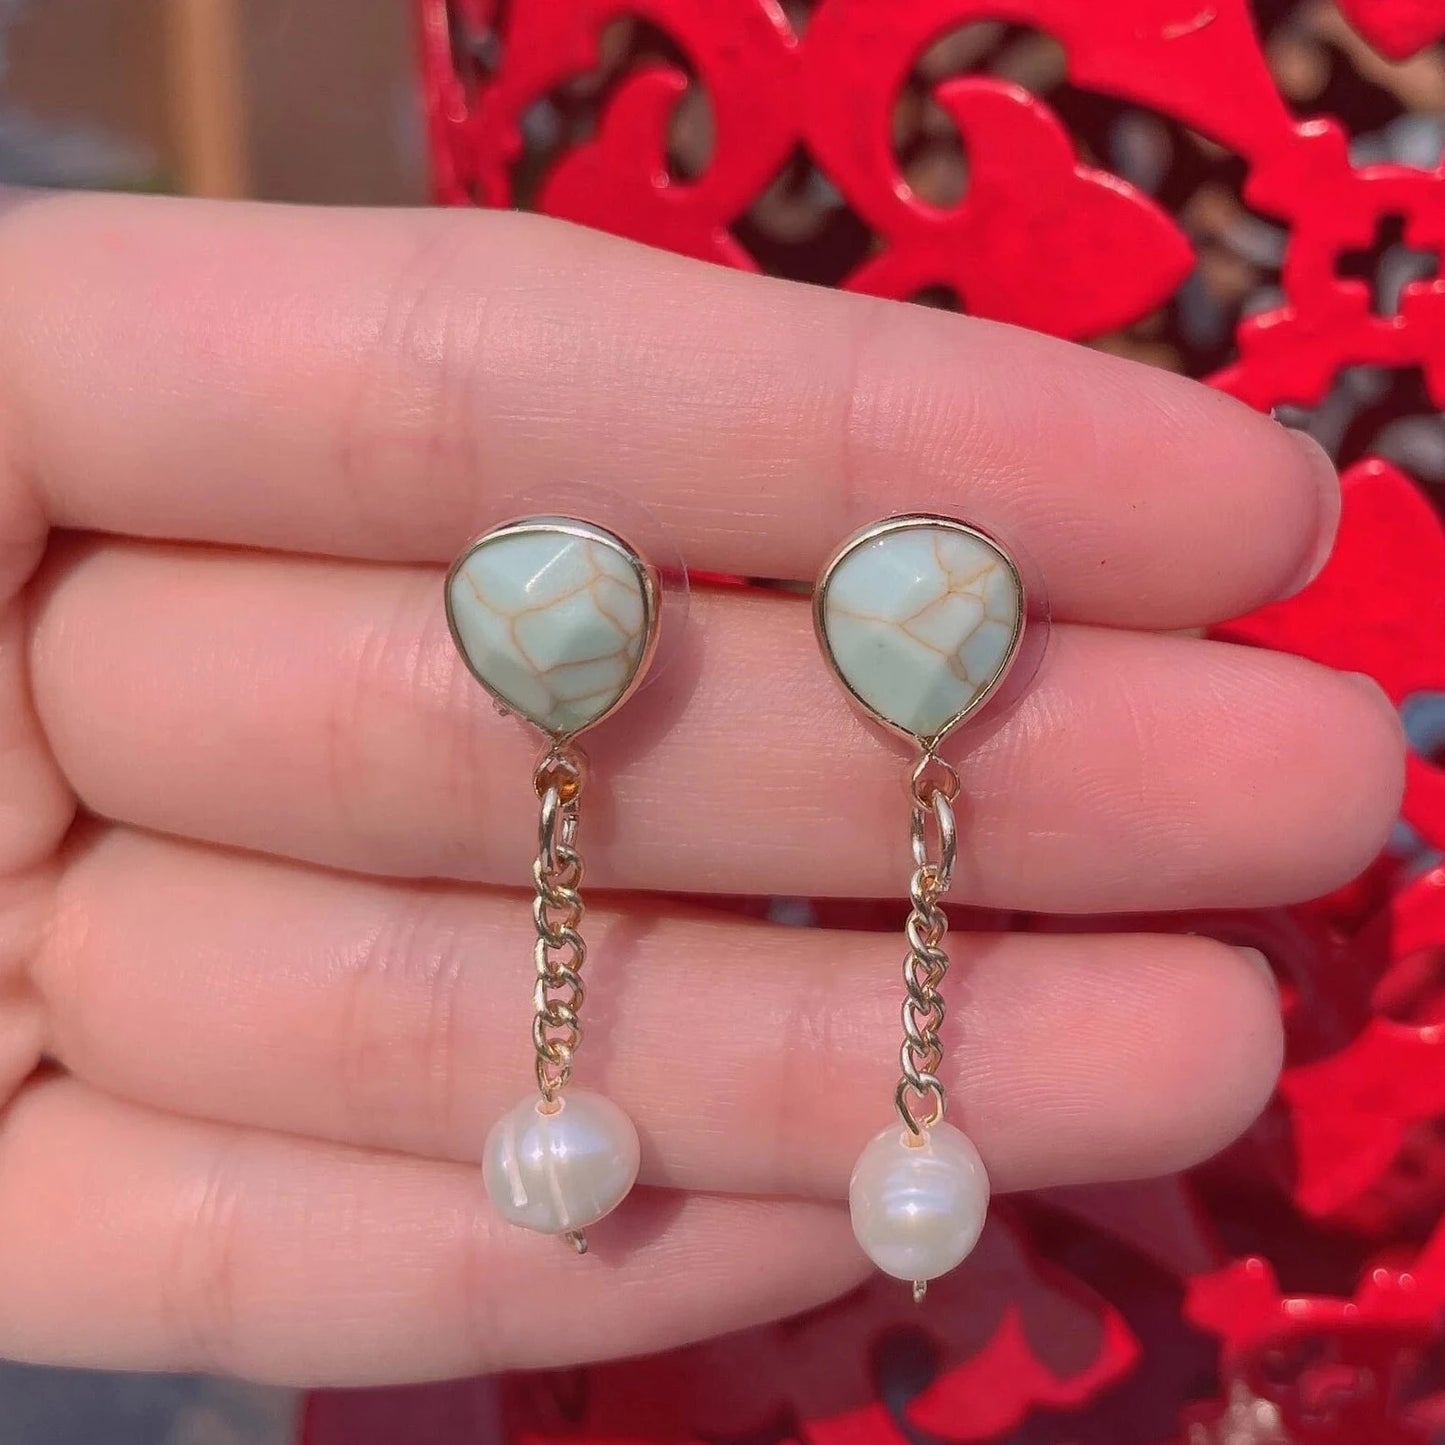 Freshwater Pearl and Gemstones w/ 18k Gold-Plated Clip-On Dangle Earrings or 18k Gold Post Earrings (Rose & Green Quartz, Multi-Color Agate)